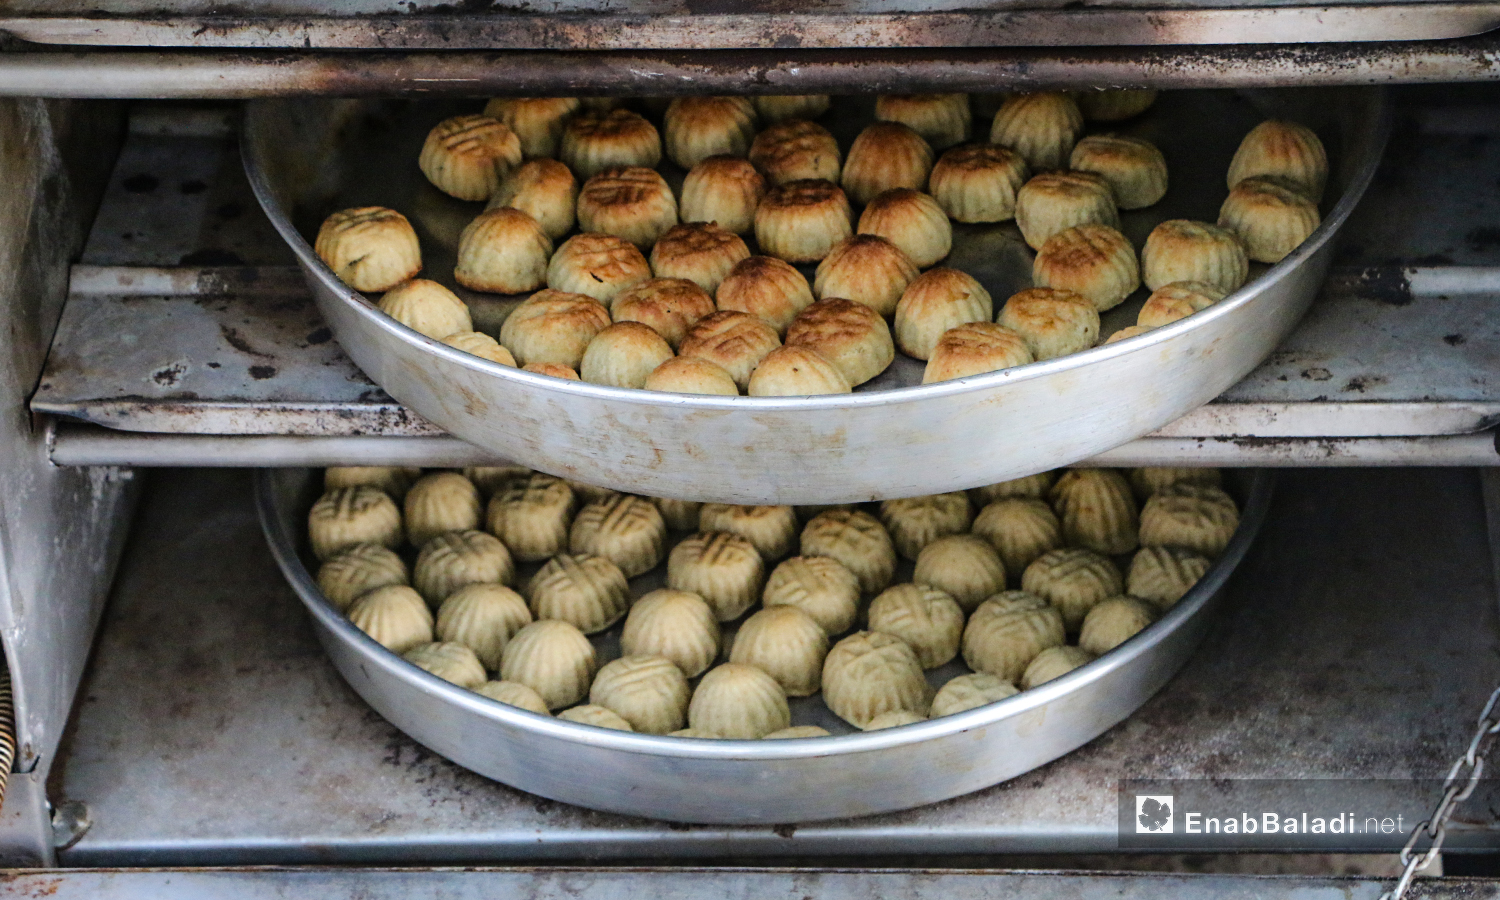 The preparation of home-made traditional Eid sweets in one of Dabiq townhouses in northern Aleppo countryside – 30 July 2020 (Enab Baladi / Abdul Salam Majan)